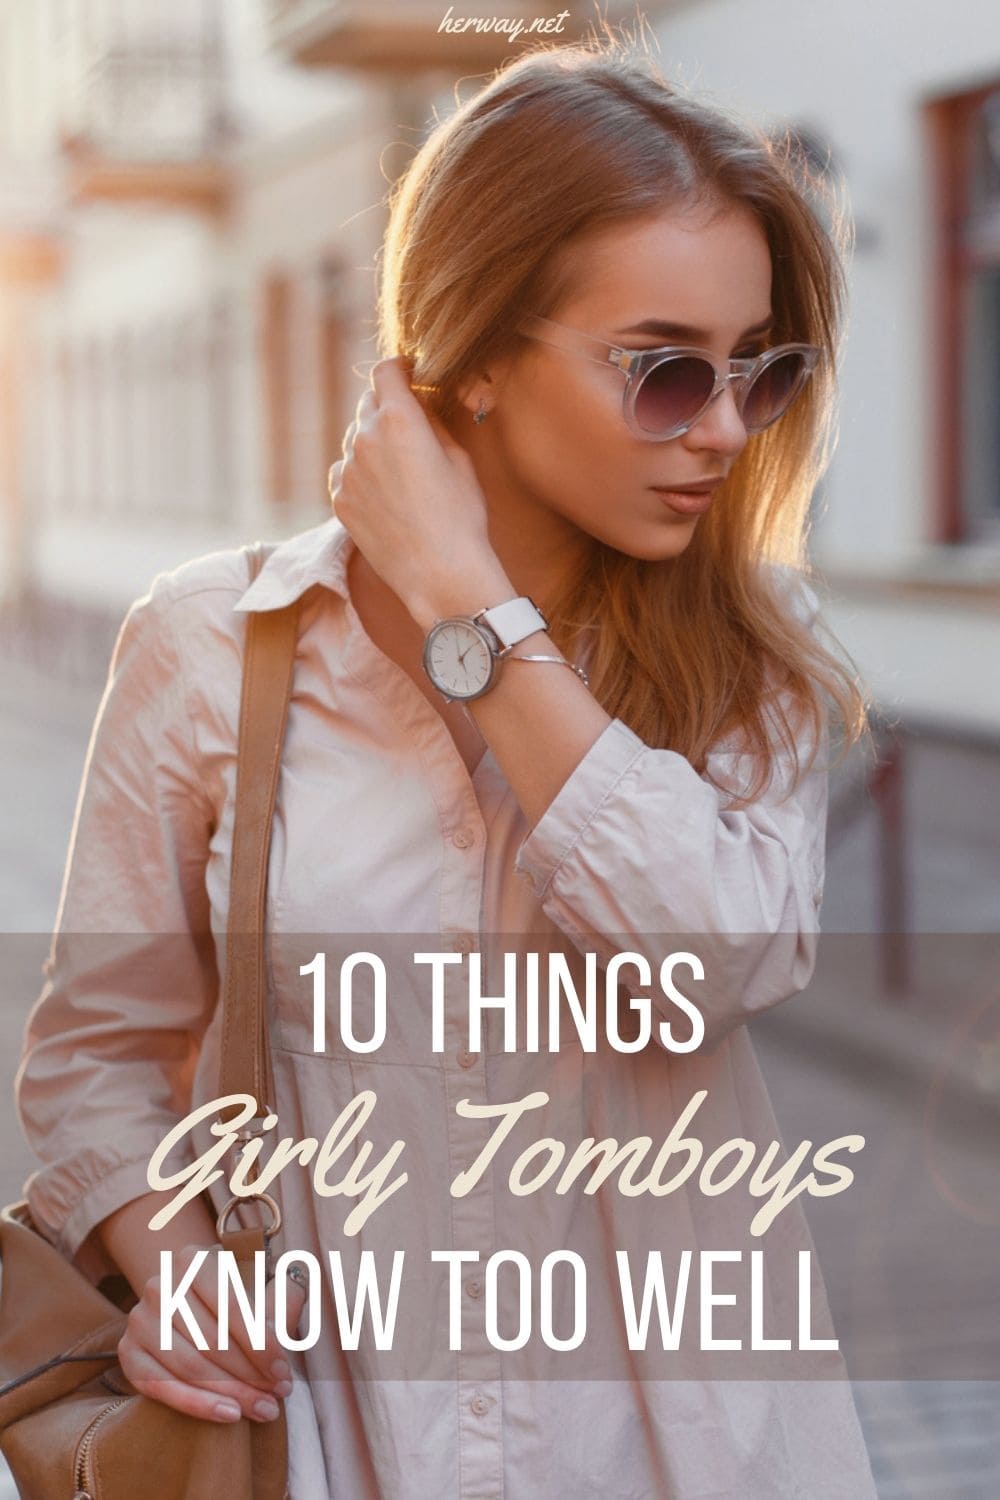 10 Things Girly Tomboys Know Too Well